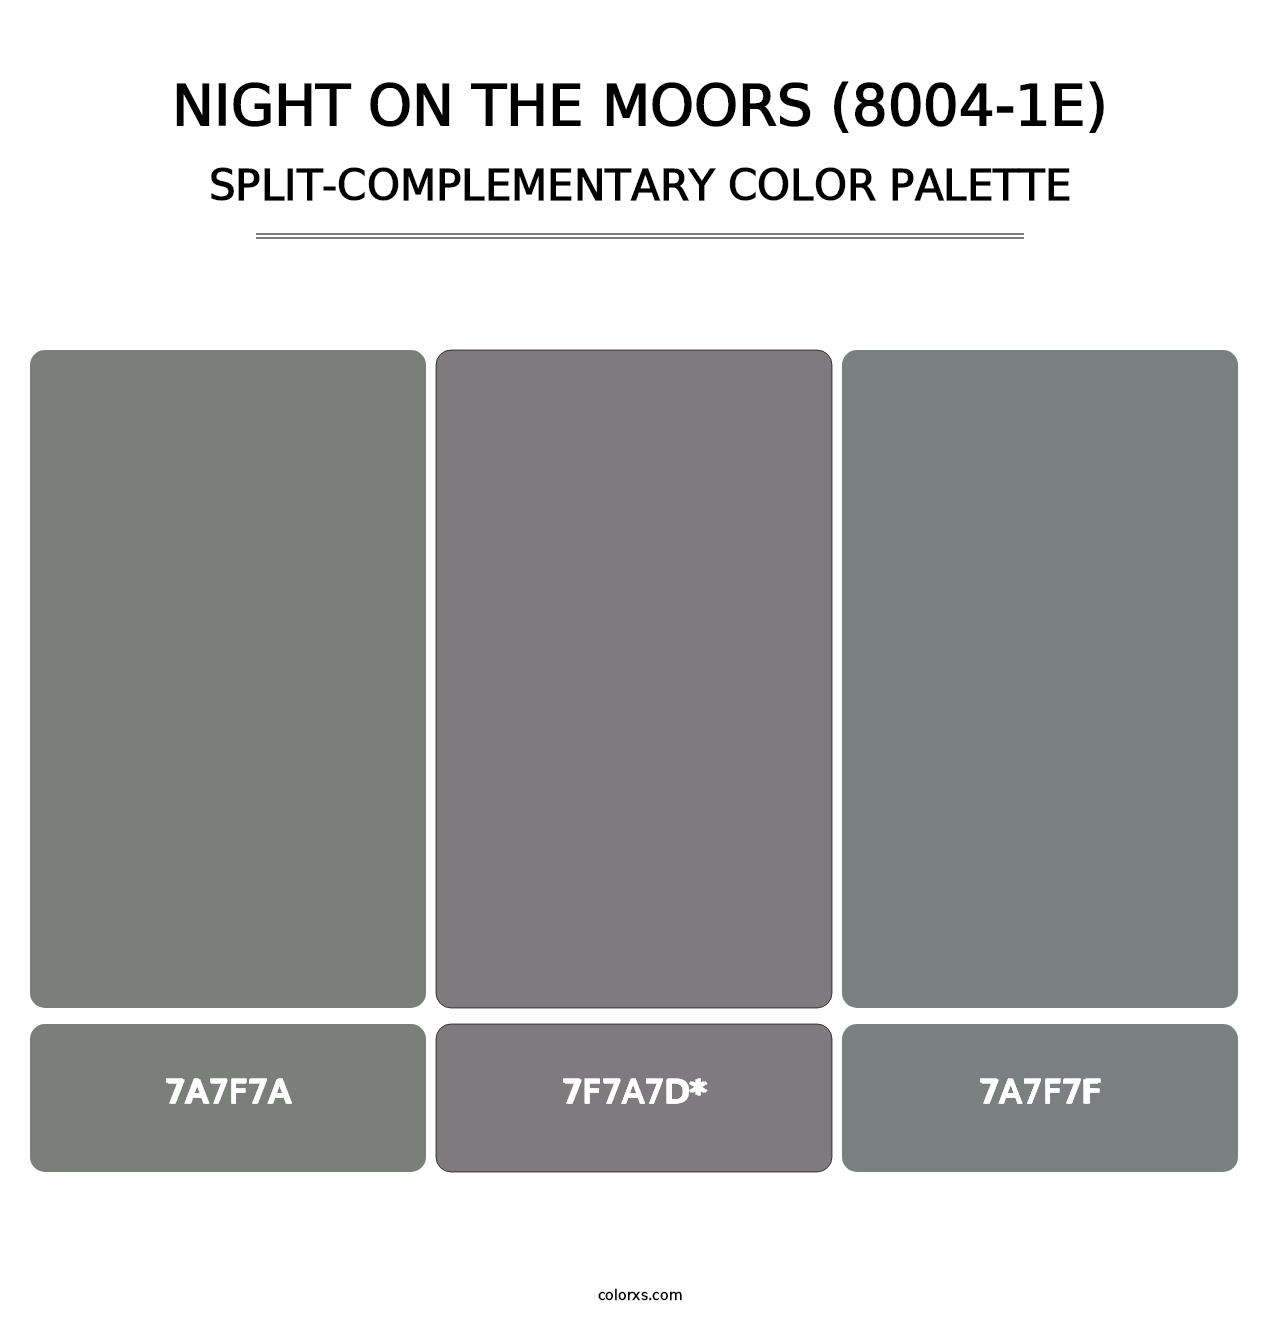 Night on the Moors (8004-1E) - Split-Complementary Color Palette